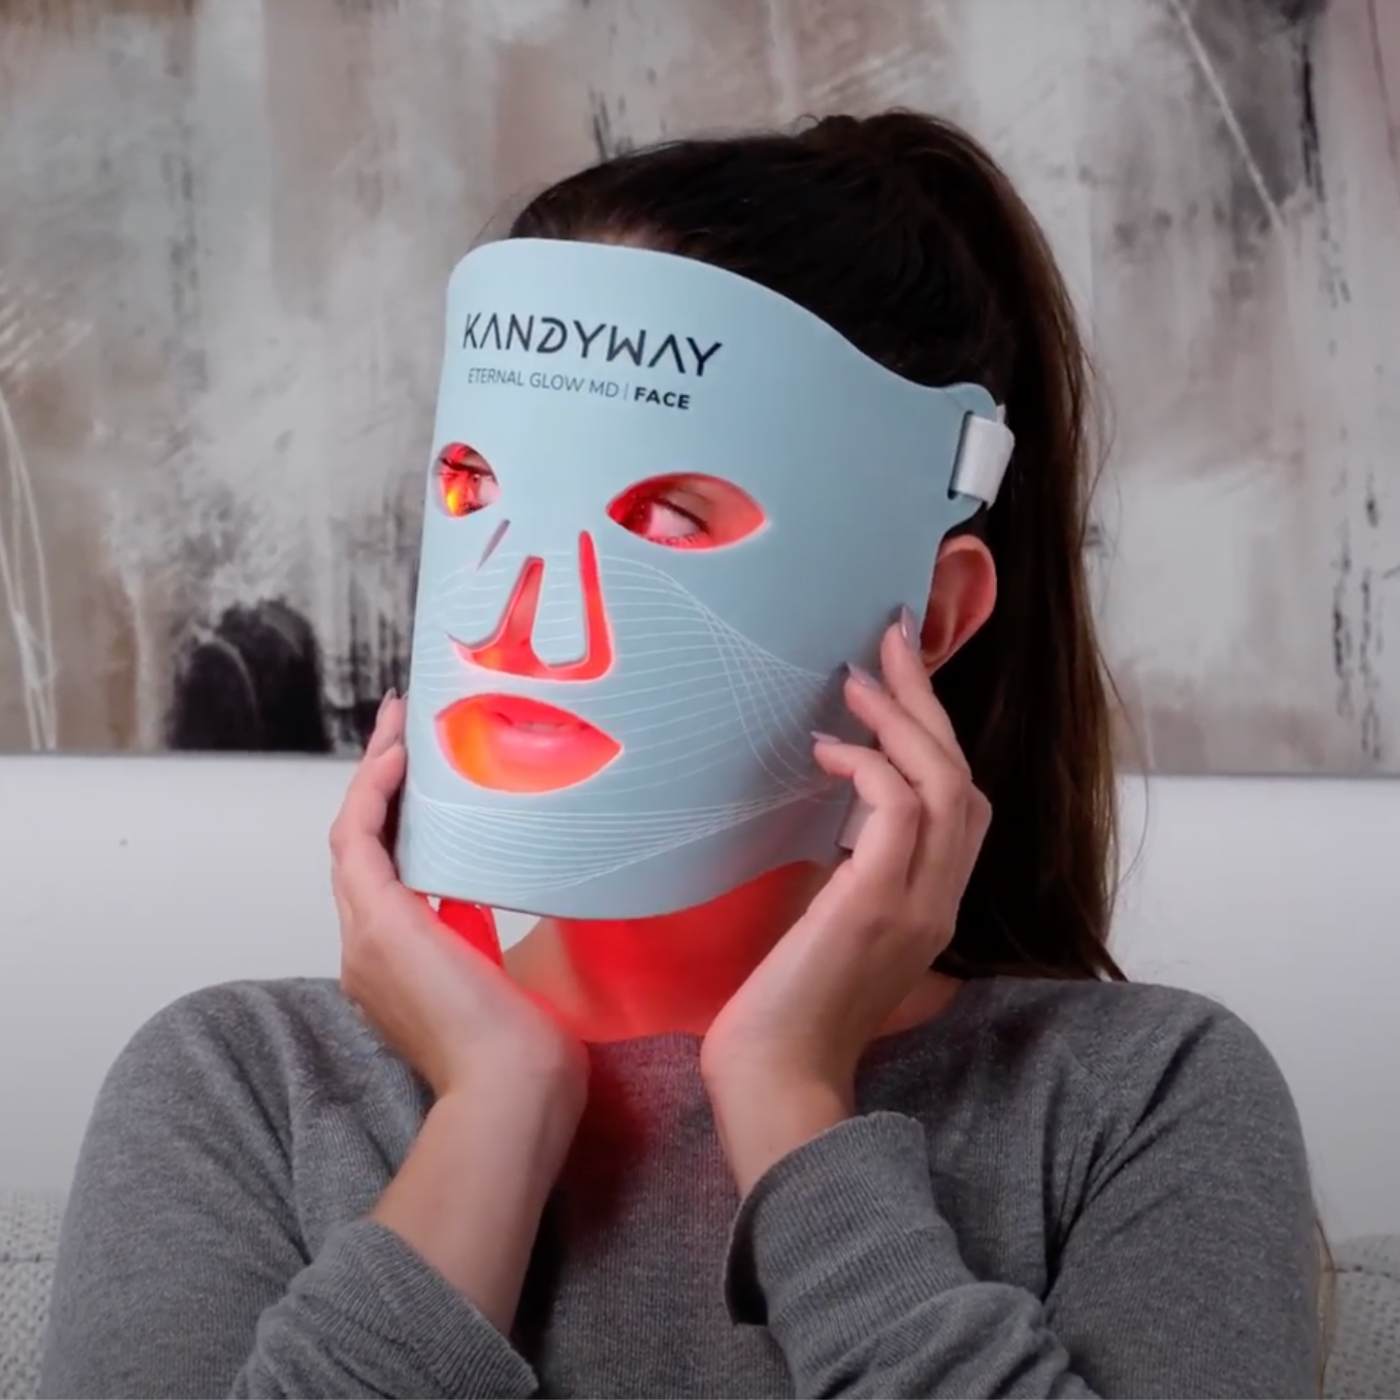 Kandyway Eternal Glow MD - Red Light Therapy Mask (PREORDER)